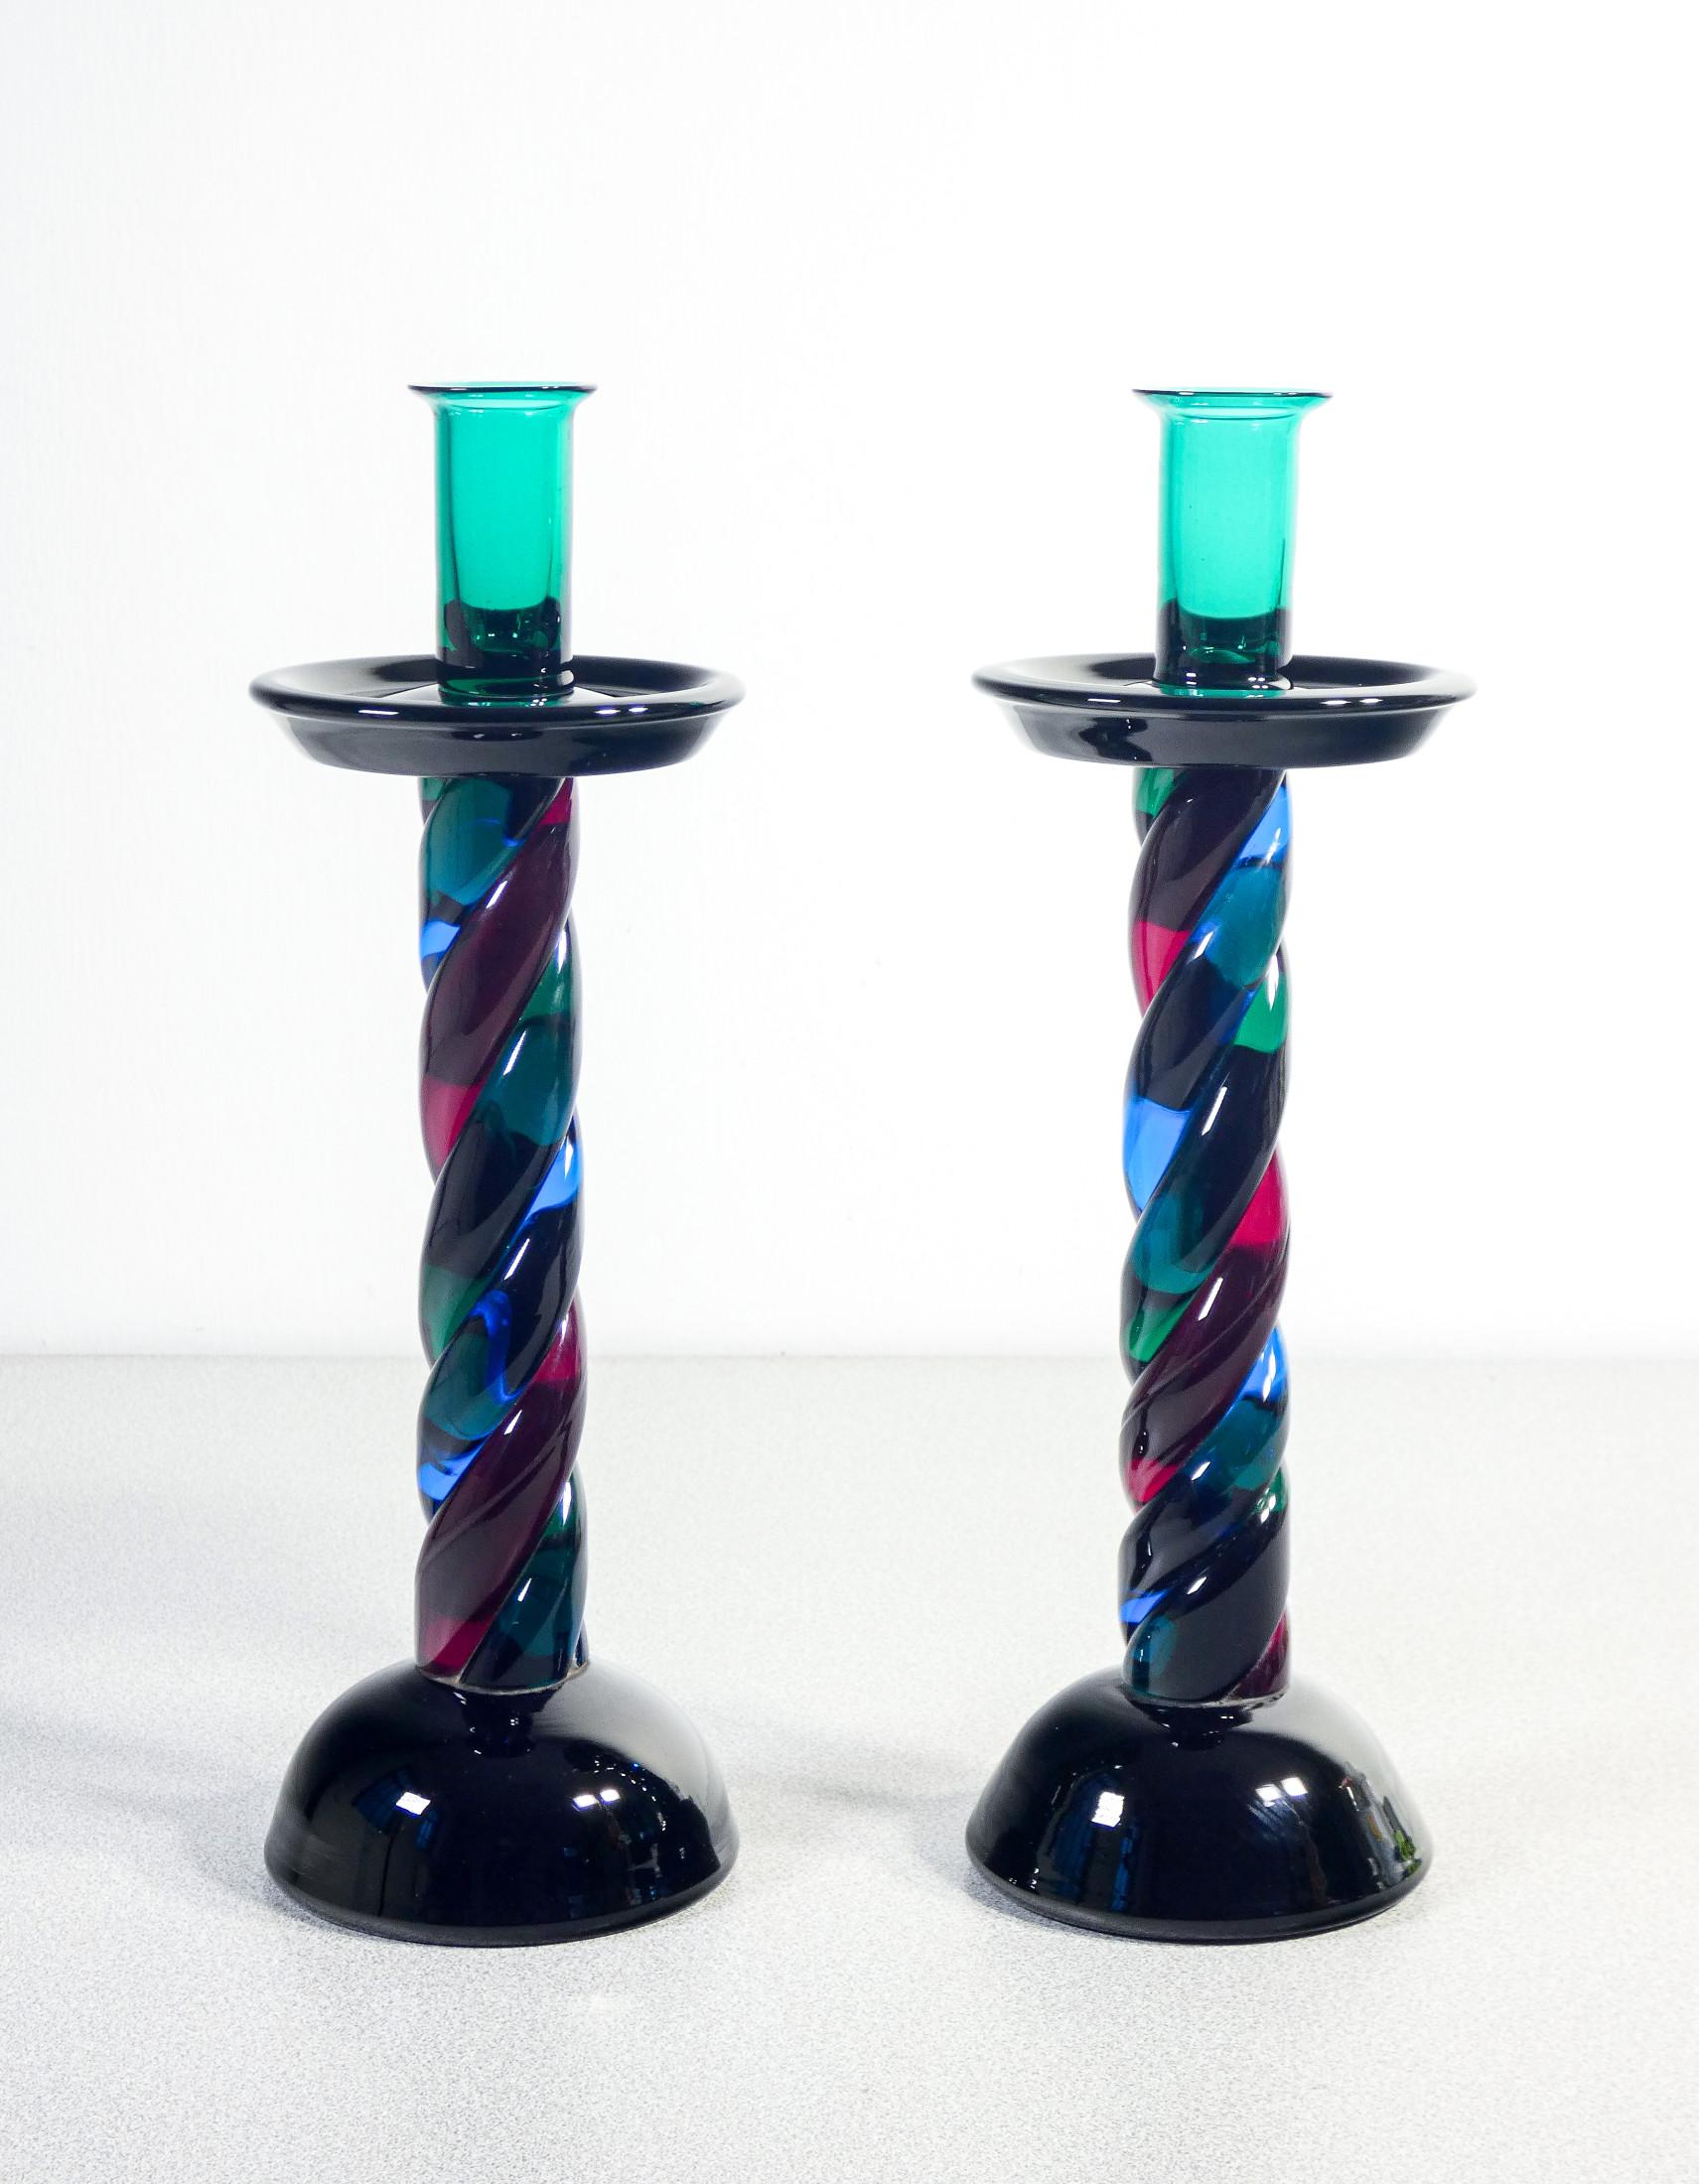 Pair of candlesticks
blown glass
murano polychrome.

ORIGIN
Italy

PERIOD
Mid-twentieth century

MARK
Murano Manufacture

MODEL
Pair of candlesticks

MATERIALS
Polychrome blown glass

DIMENSIONS
H 32 cm

CONDITIONS
Perfette. Evaluate through the